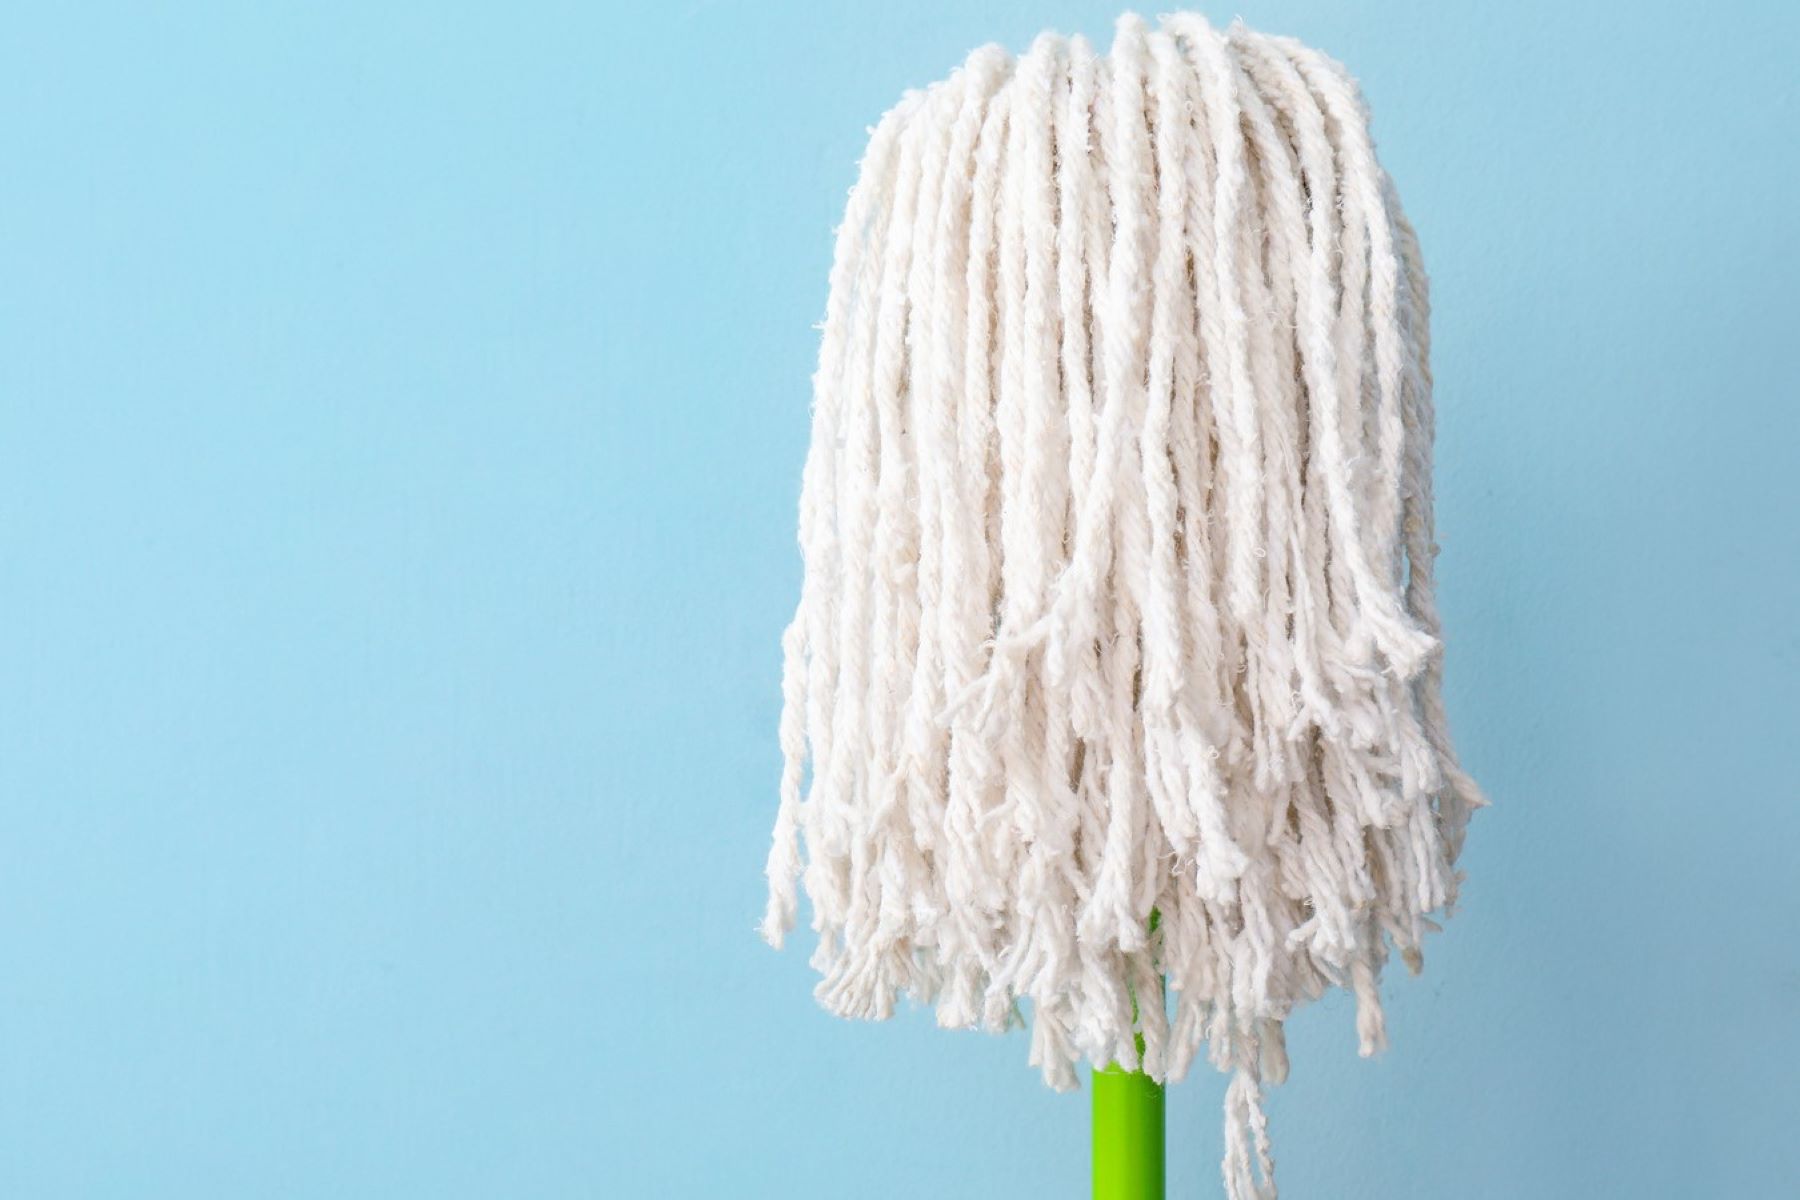 How To Change The Mop Head